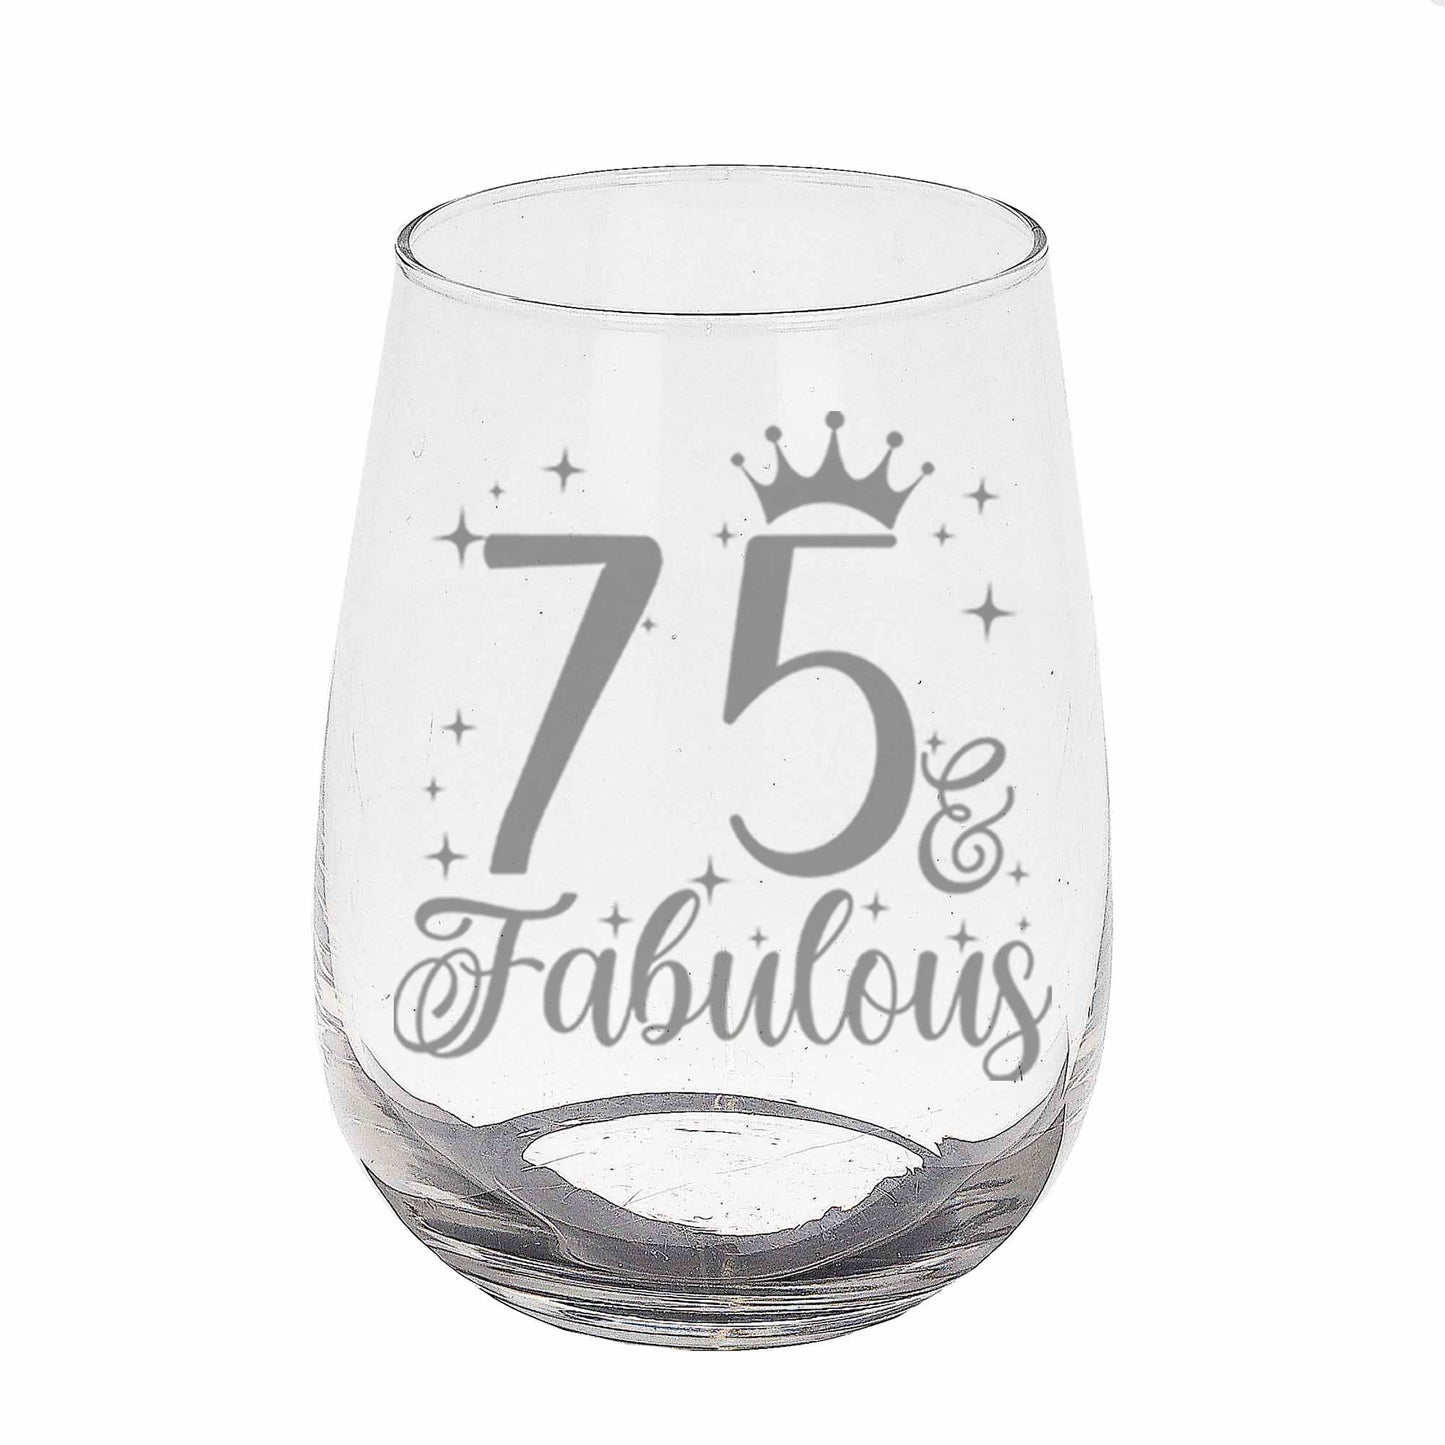 75 & Fabulous Engraved Stemless Gin Glass and/or Coaster Set  - Always Looking Good - Stemless Gin Glass On Its Own  